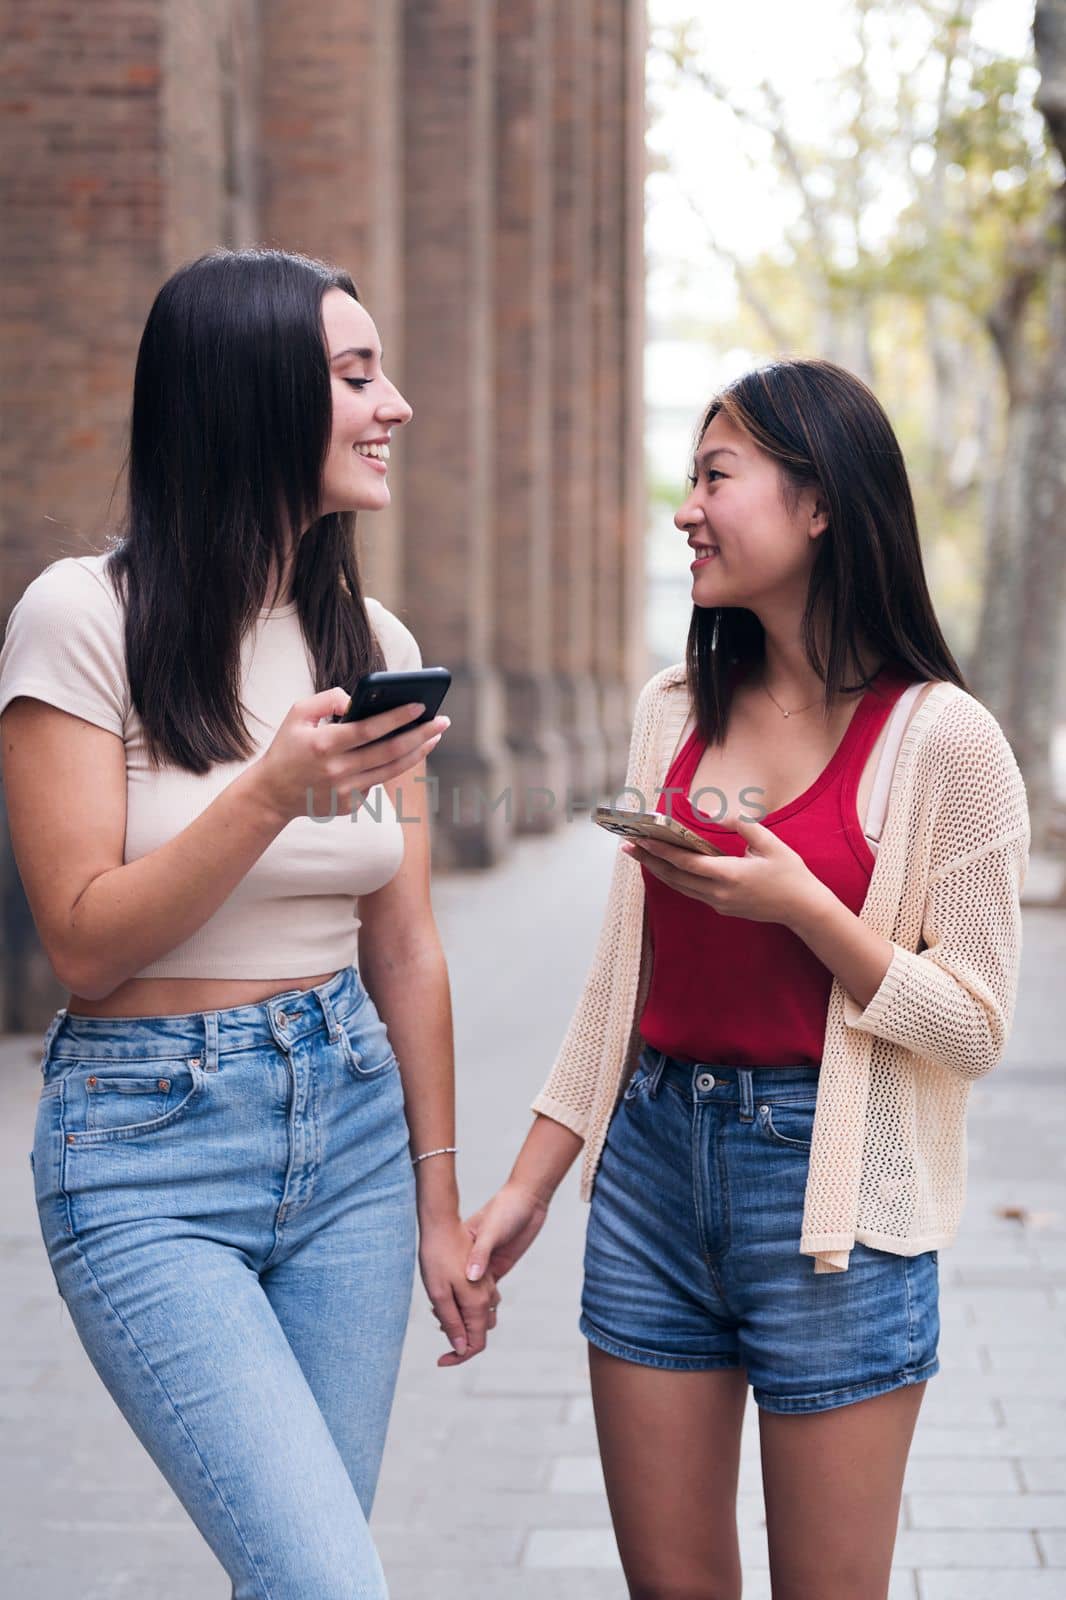 two young women having a good time with their cell phones while walking through the city holding hands, concept of friendship and love between people of the same sex